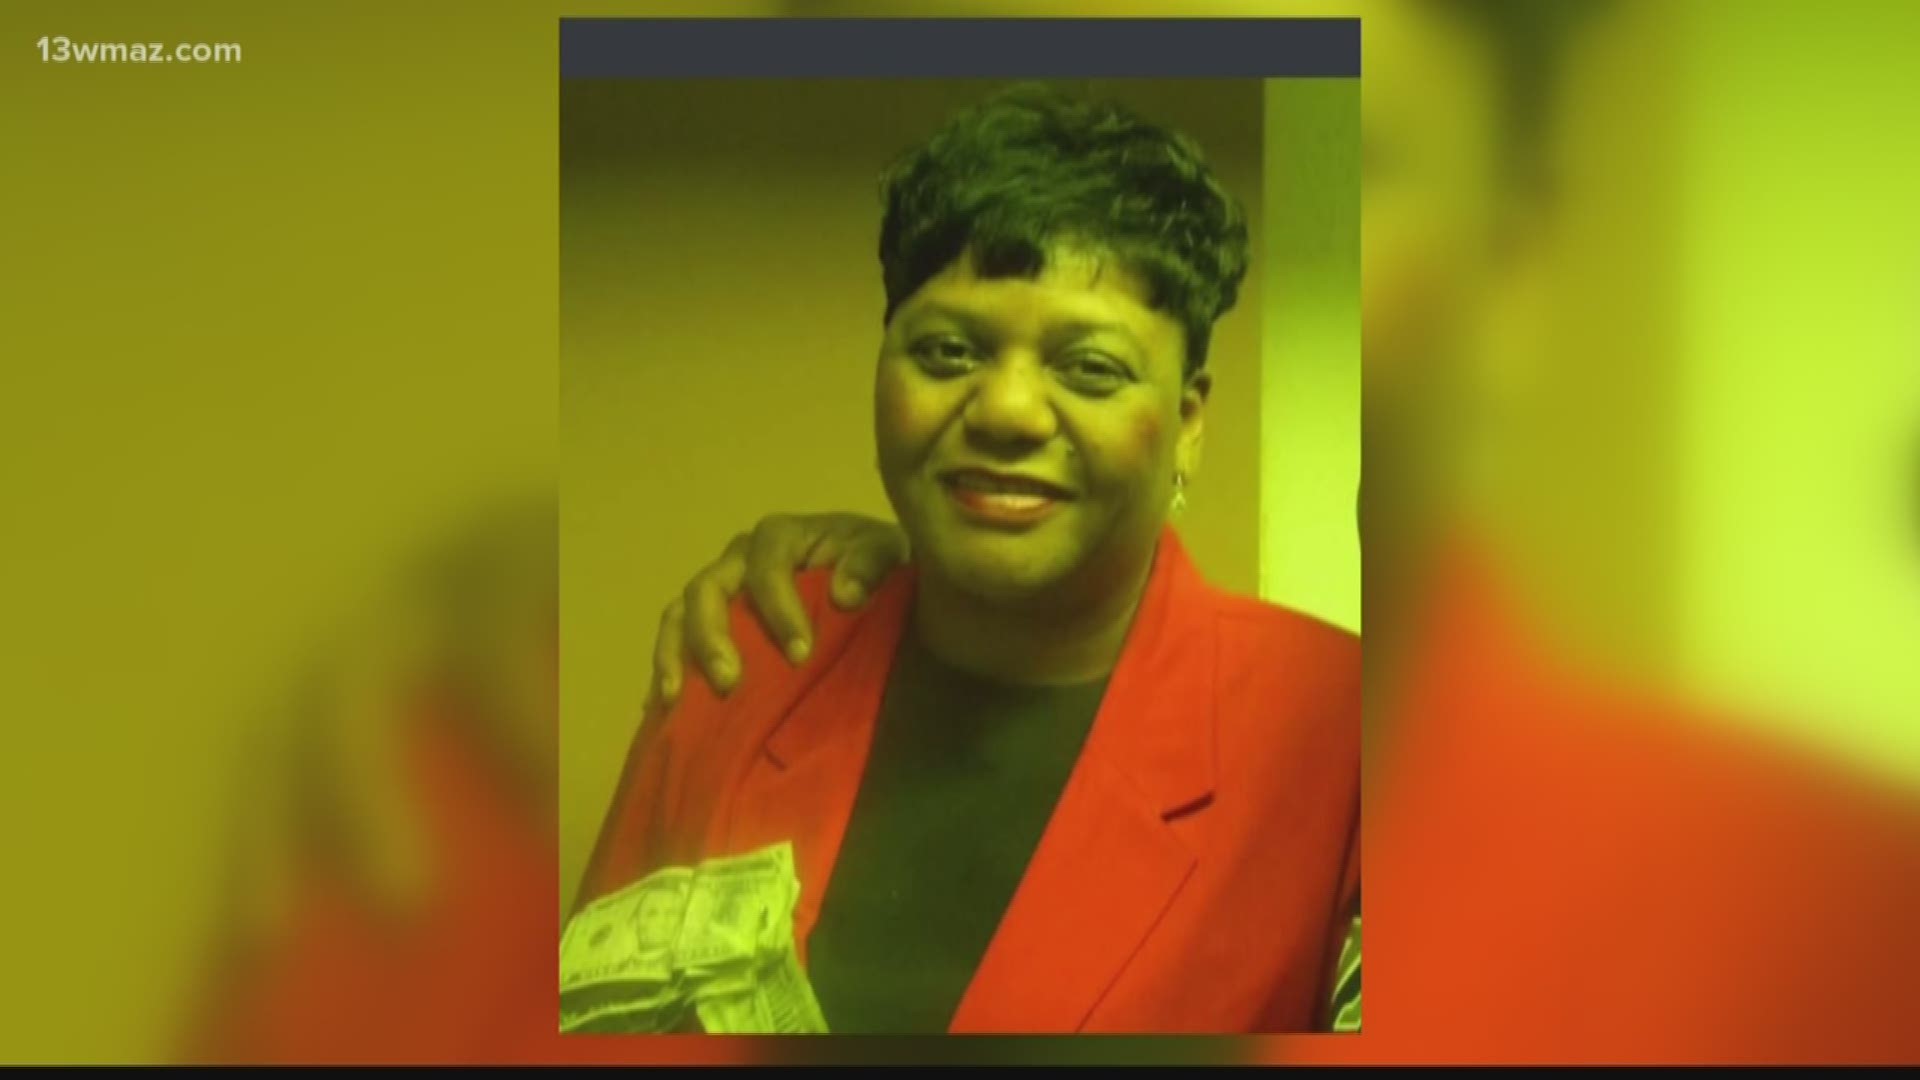 On Friday morning, Peach County coroner Kerry Rooks confirmed to 13WMAZ that 58-year-old Pearlie Mae Williams had died.